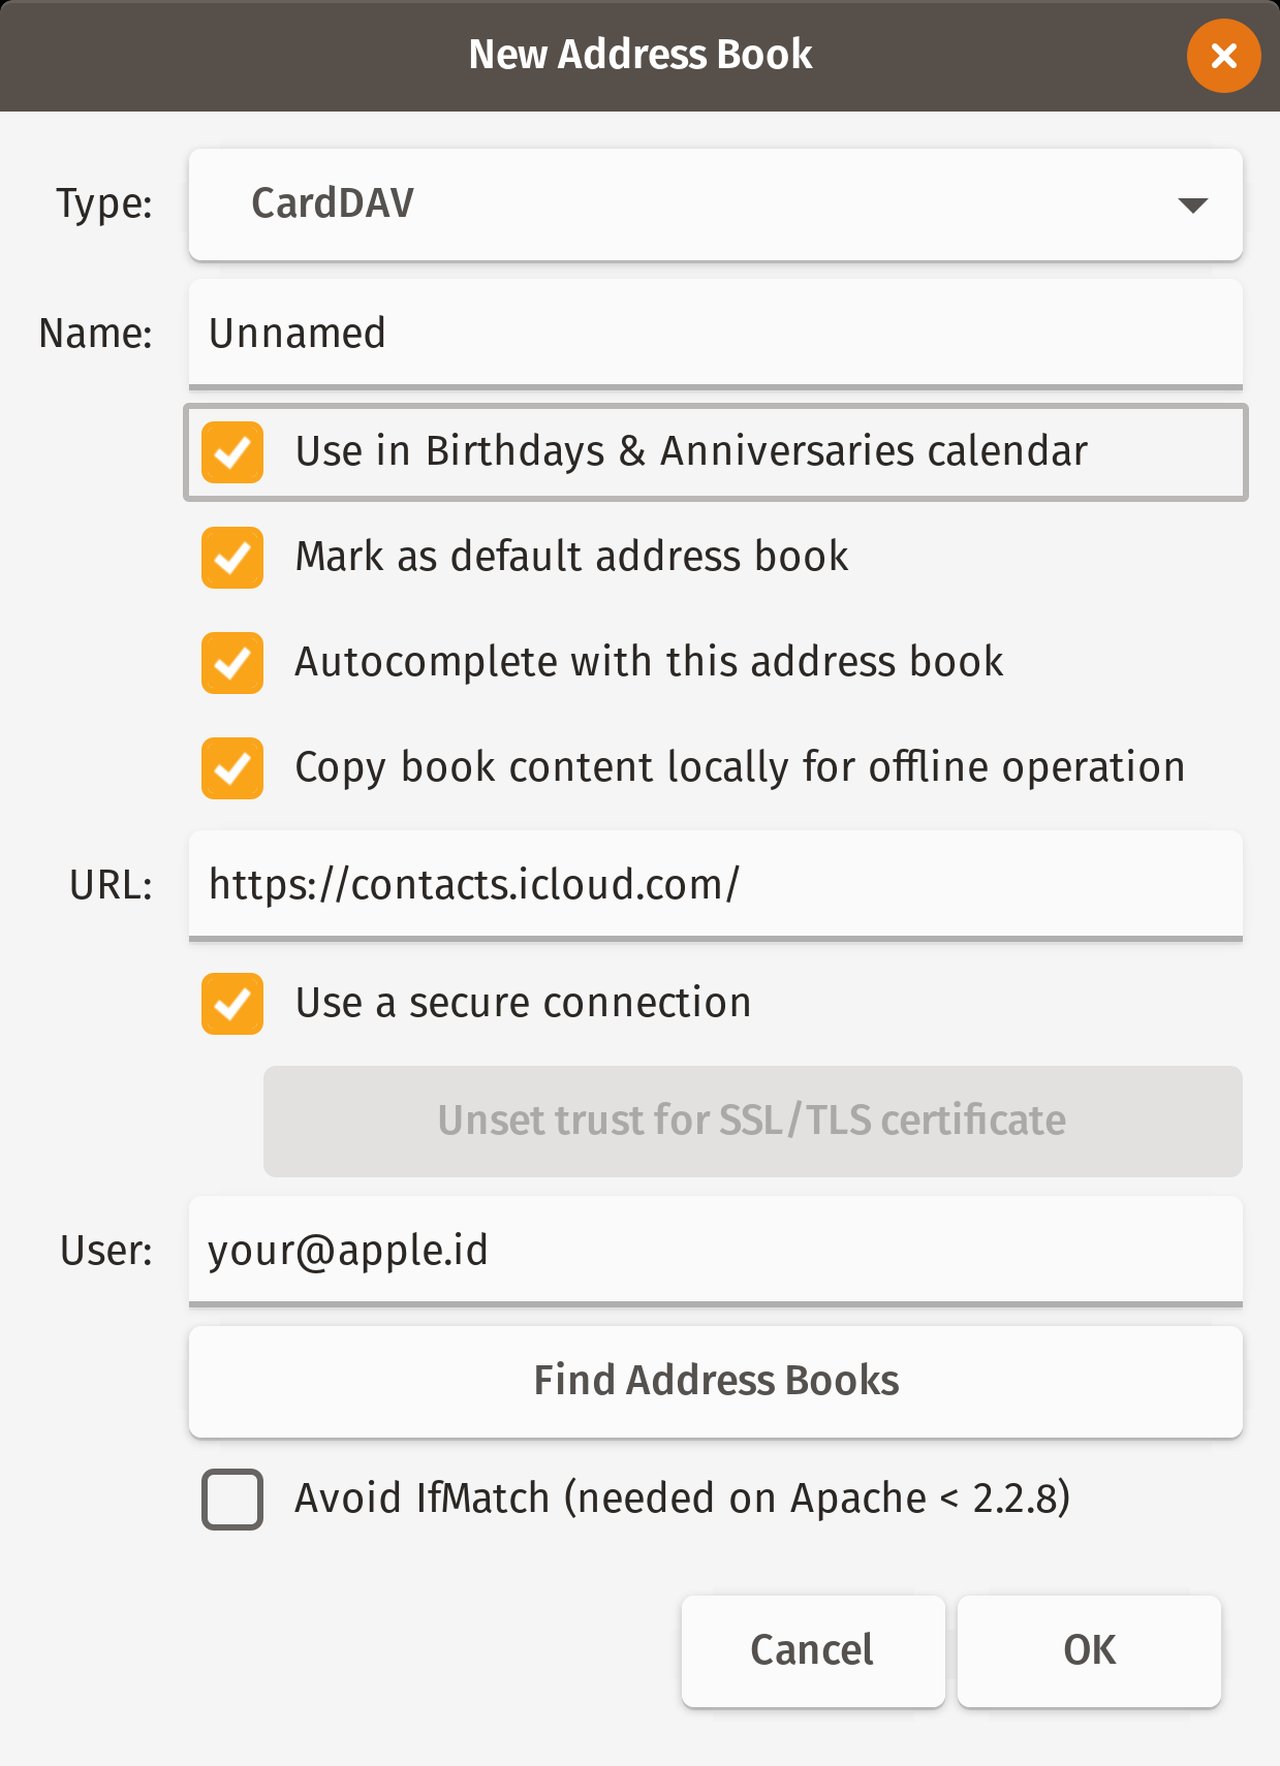 Screenshot of the New Address Book window. All of the settings shown are described in the instructions here.